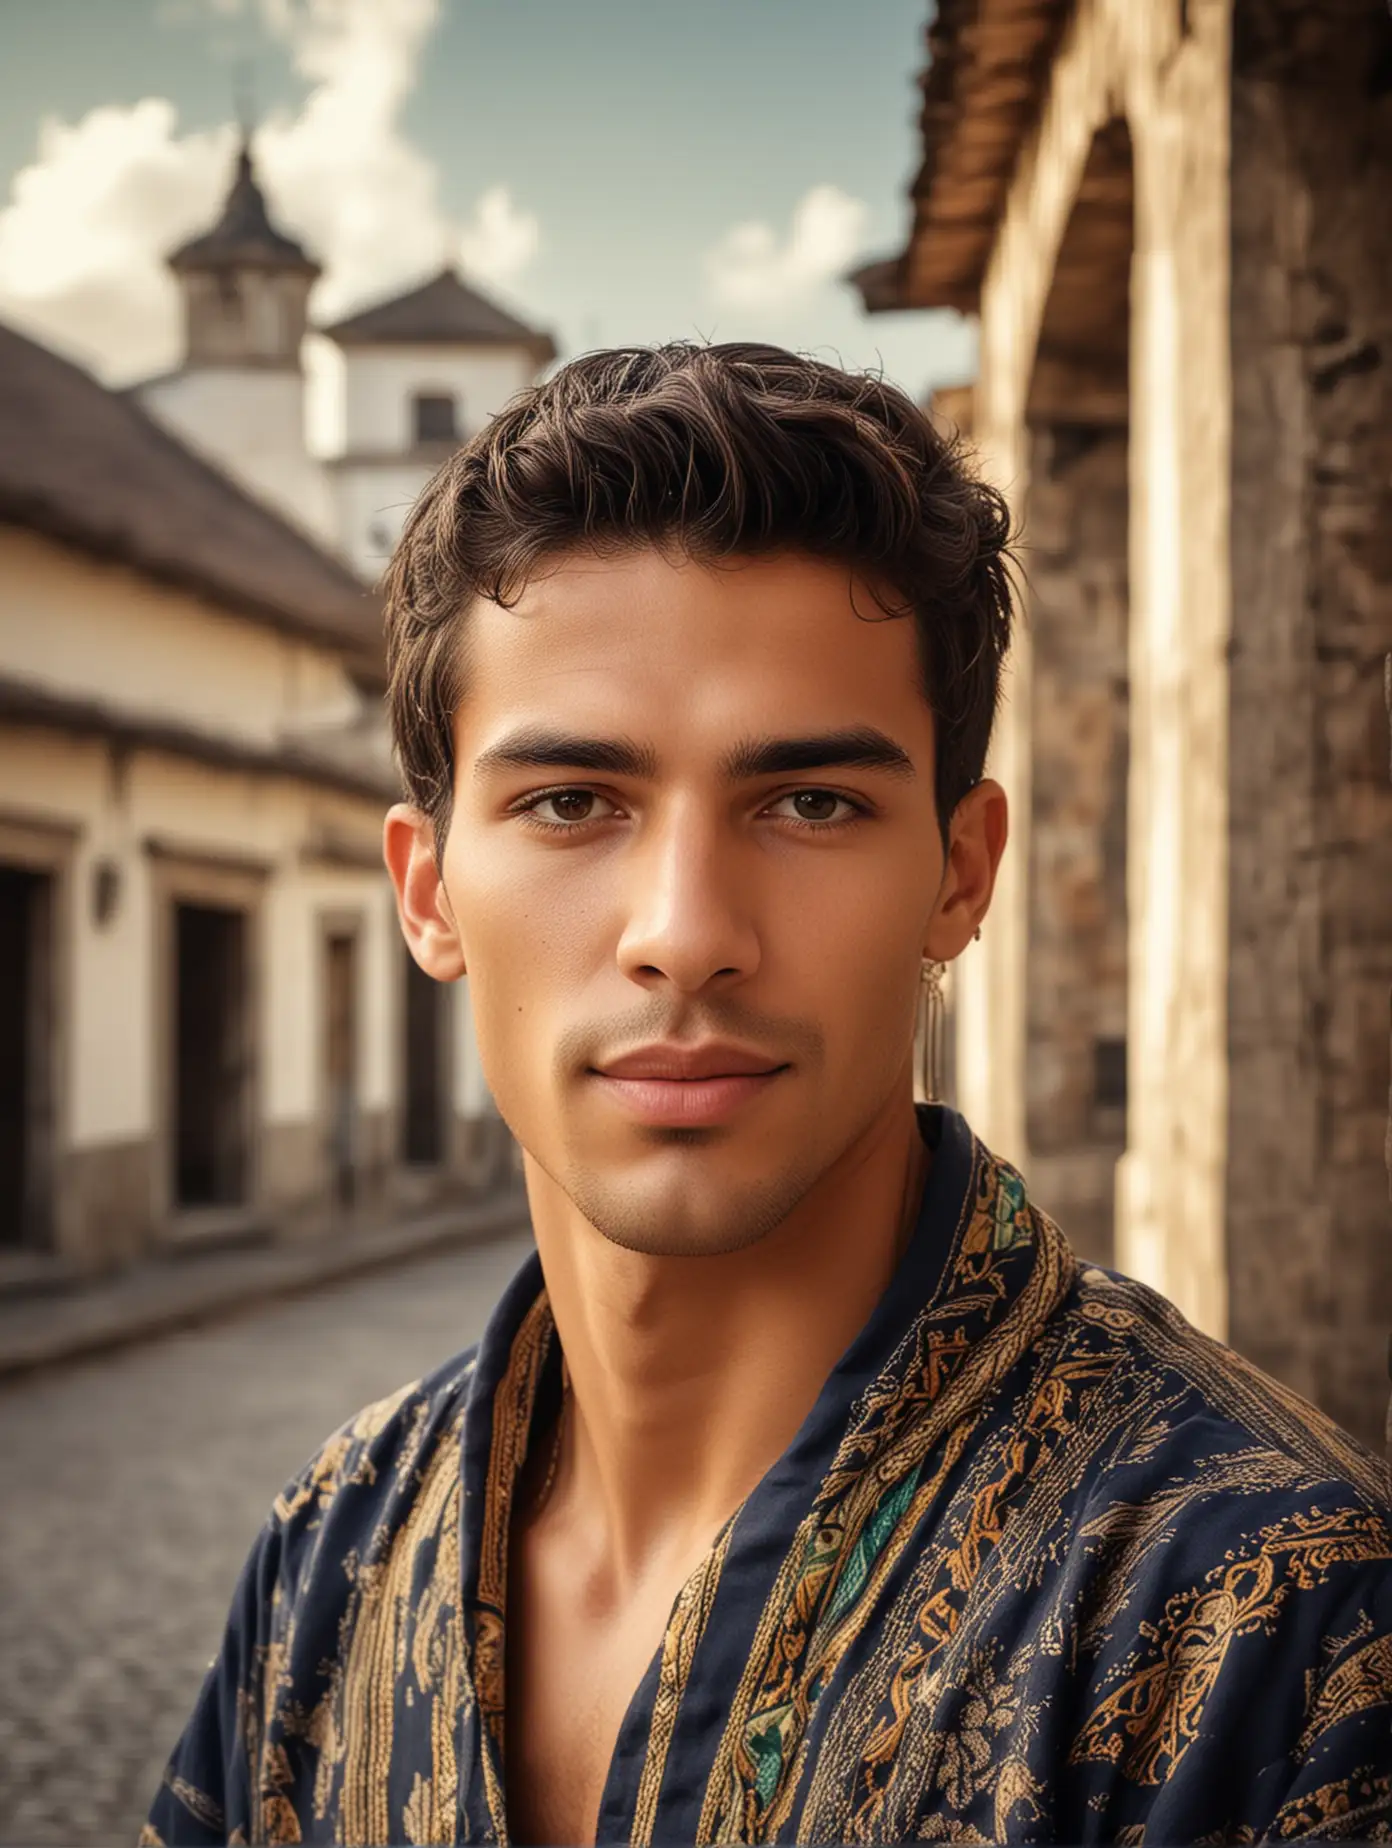 Brazilian Man in Traditional Clothing with Famous Architecture Background